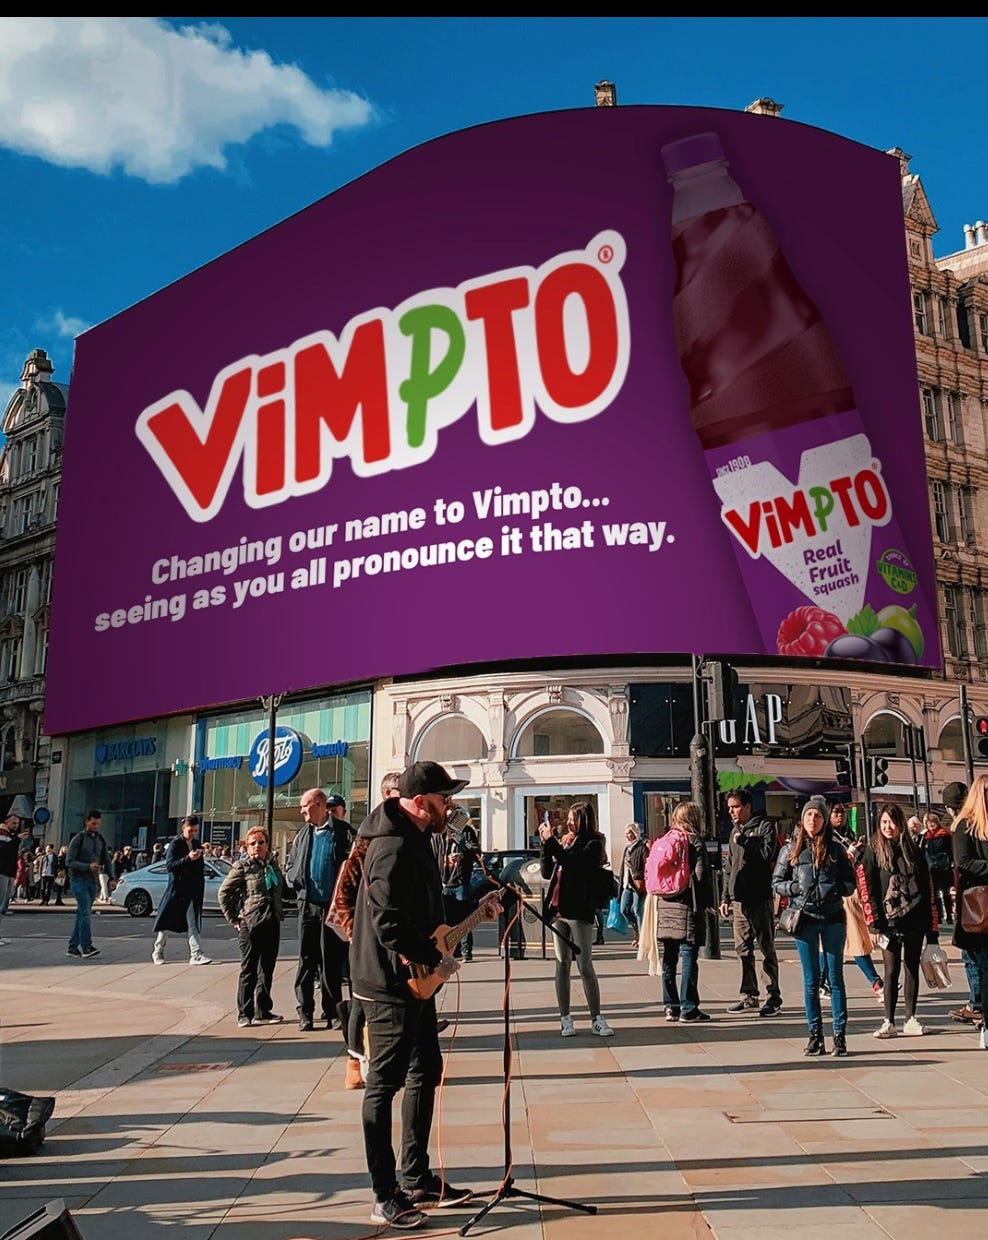 london's piccadily circus with a large billboard advertisement for Vimto, a soft drink. The billboard humorously states, "Changing our name to Vimpto... seeing as you all pronounce it that way